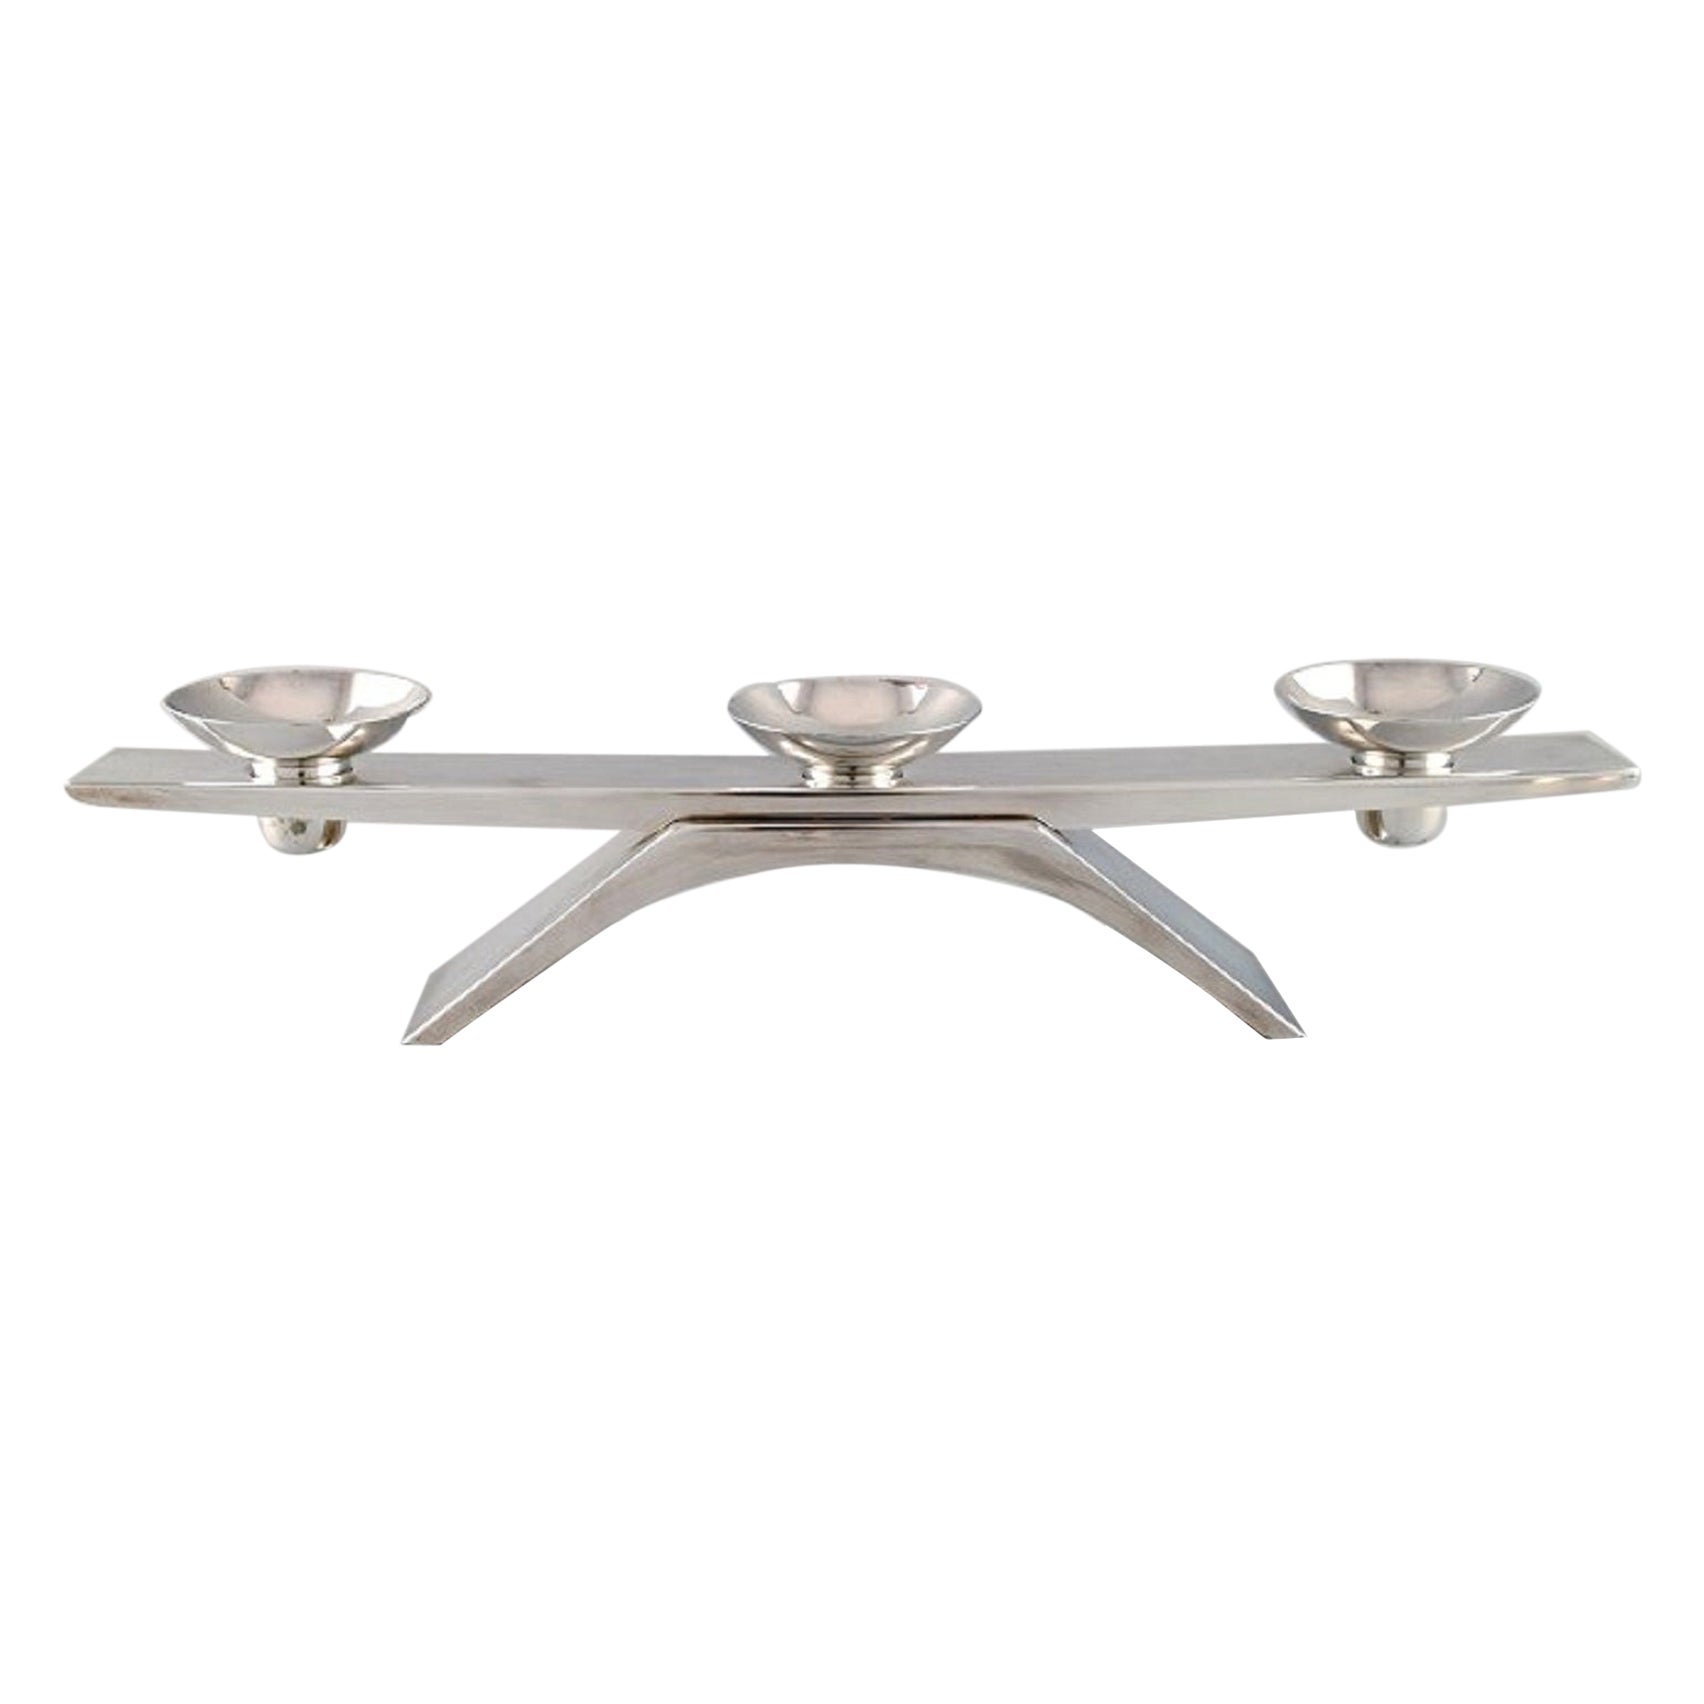 WMF, Germany, Modernist Ikora Candleholder in Plated Silver, Mid-20th Century For Sale